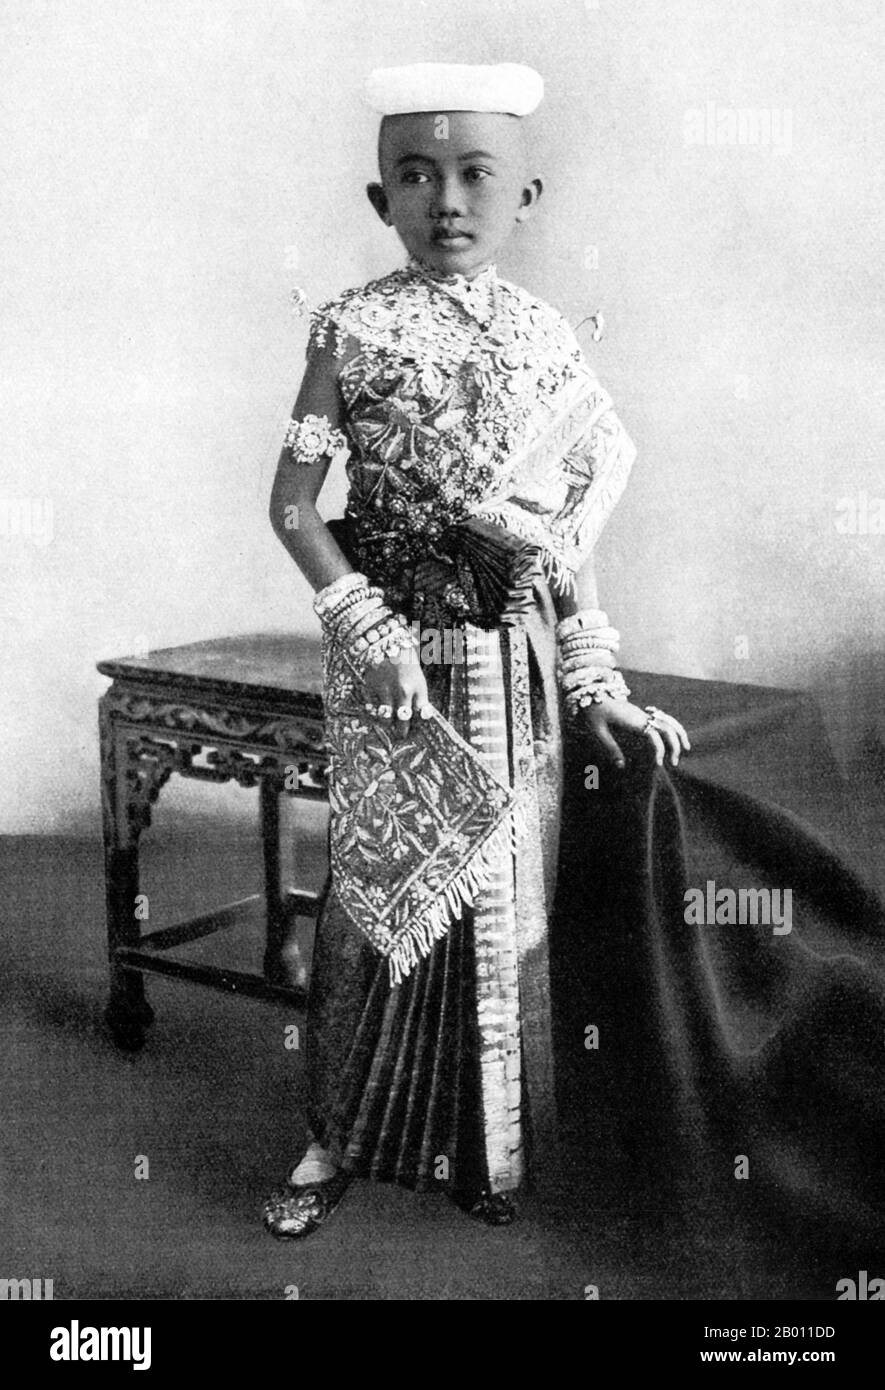 Thailand: A royal prince dressed and adorned for his tonsure ceremony, Siam, late 19th century.  In 19th-century Siam, almost every young male in the royal family entered the ‘sangha’ or Buddhist monkhood as a rite of passage. The tonsure ceremony was an initial act of this rite as all novices must have their heads shaved to enter the monastic order. The tradition survives to this day, not just among Thai royalty, but at all levels of society. Stock Photo